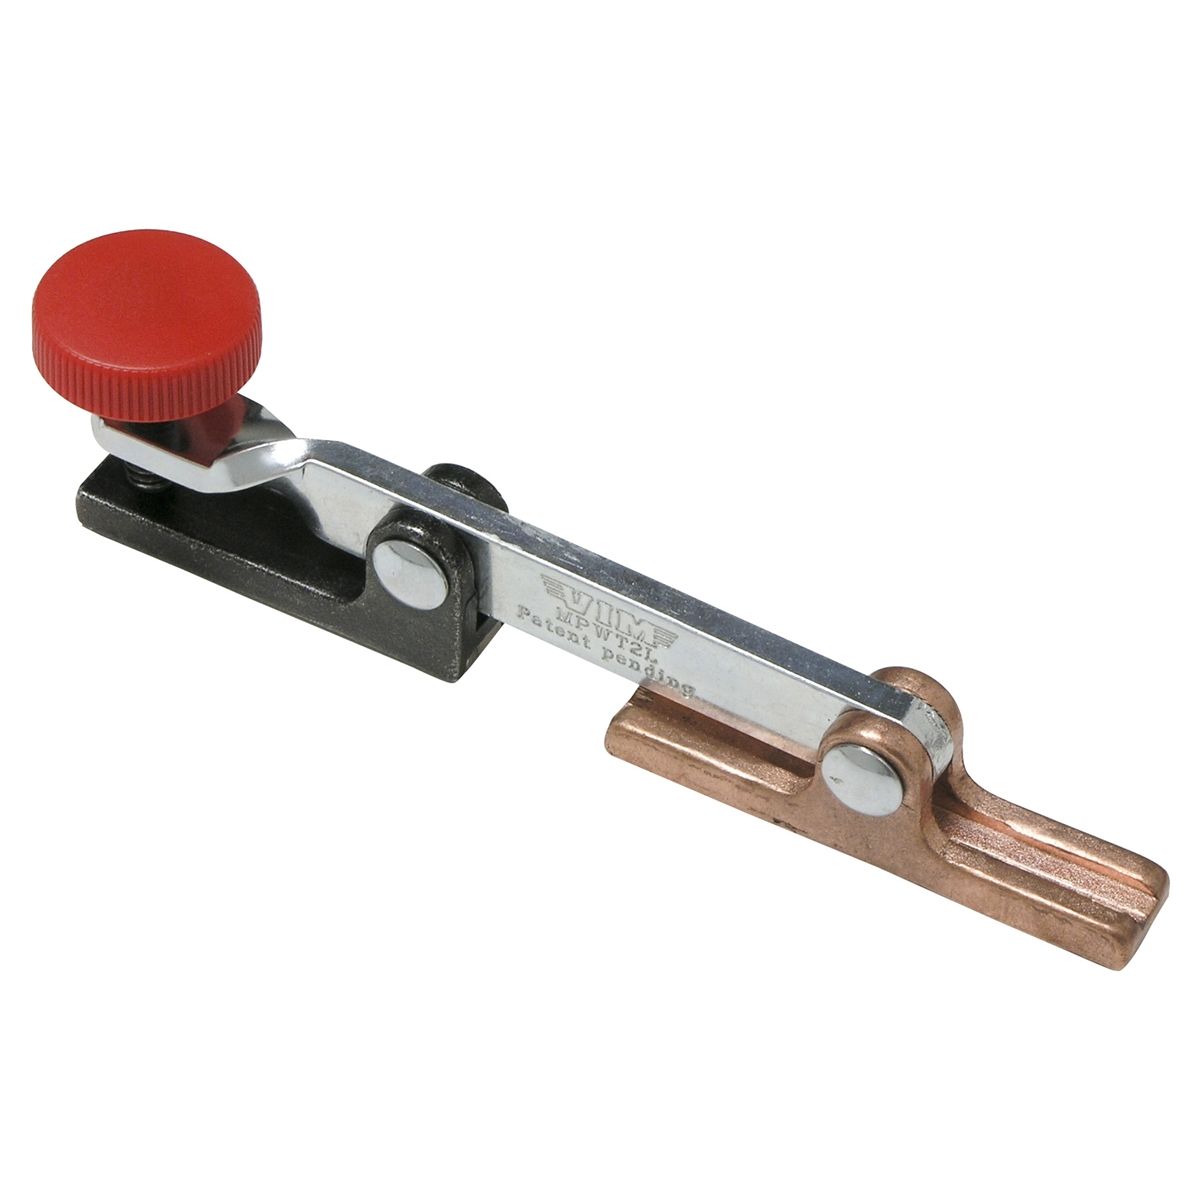 Magnetic Plug Weld Tool - 2.5 In Copper Pads, Side to Side